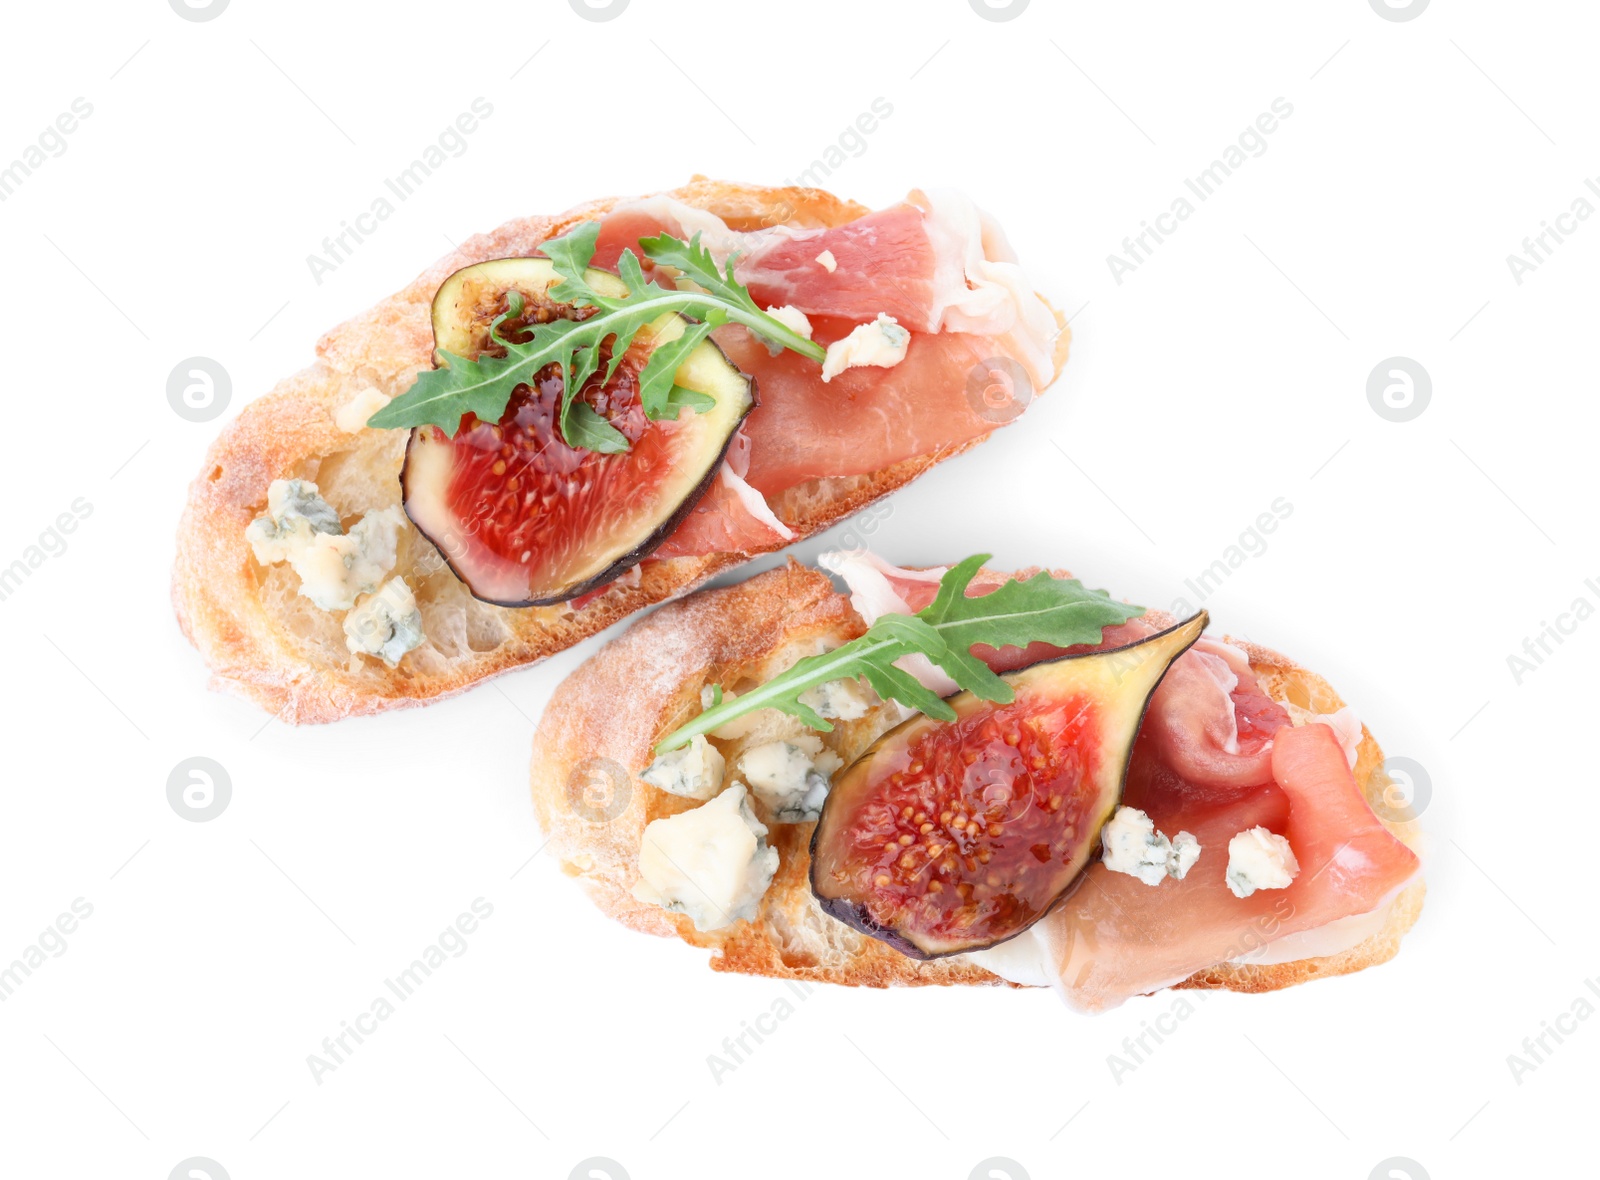 Photo of Sandwiches with ripe figs and prosciutto on white background, top view